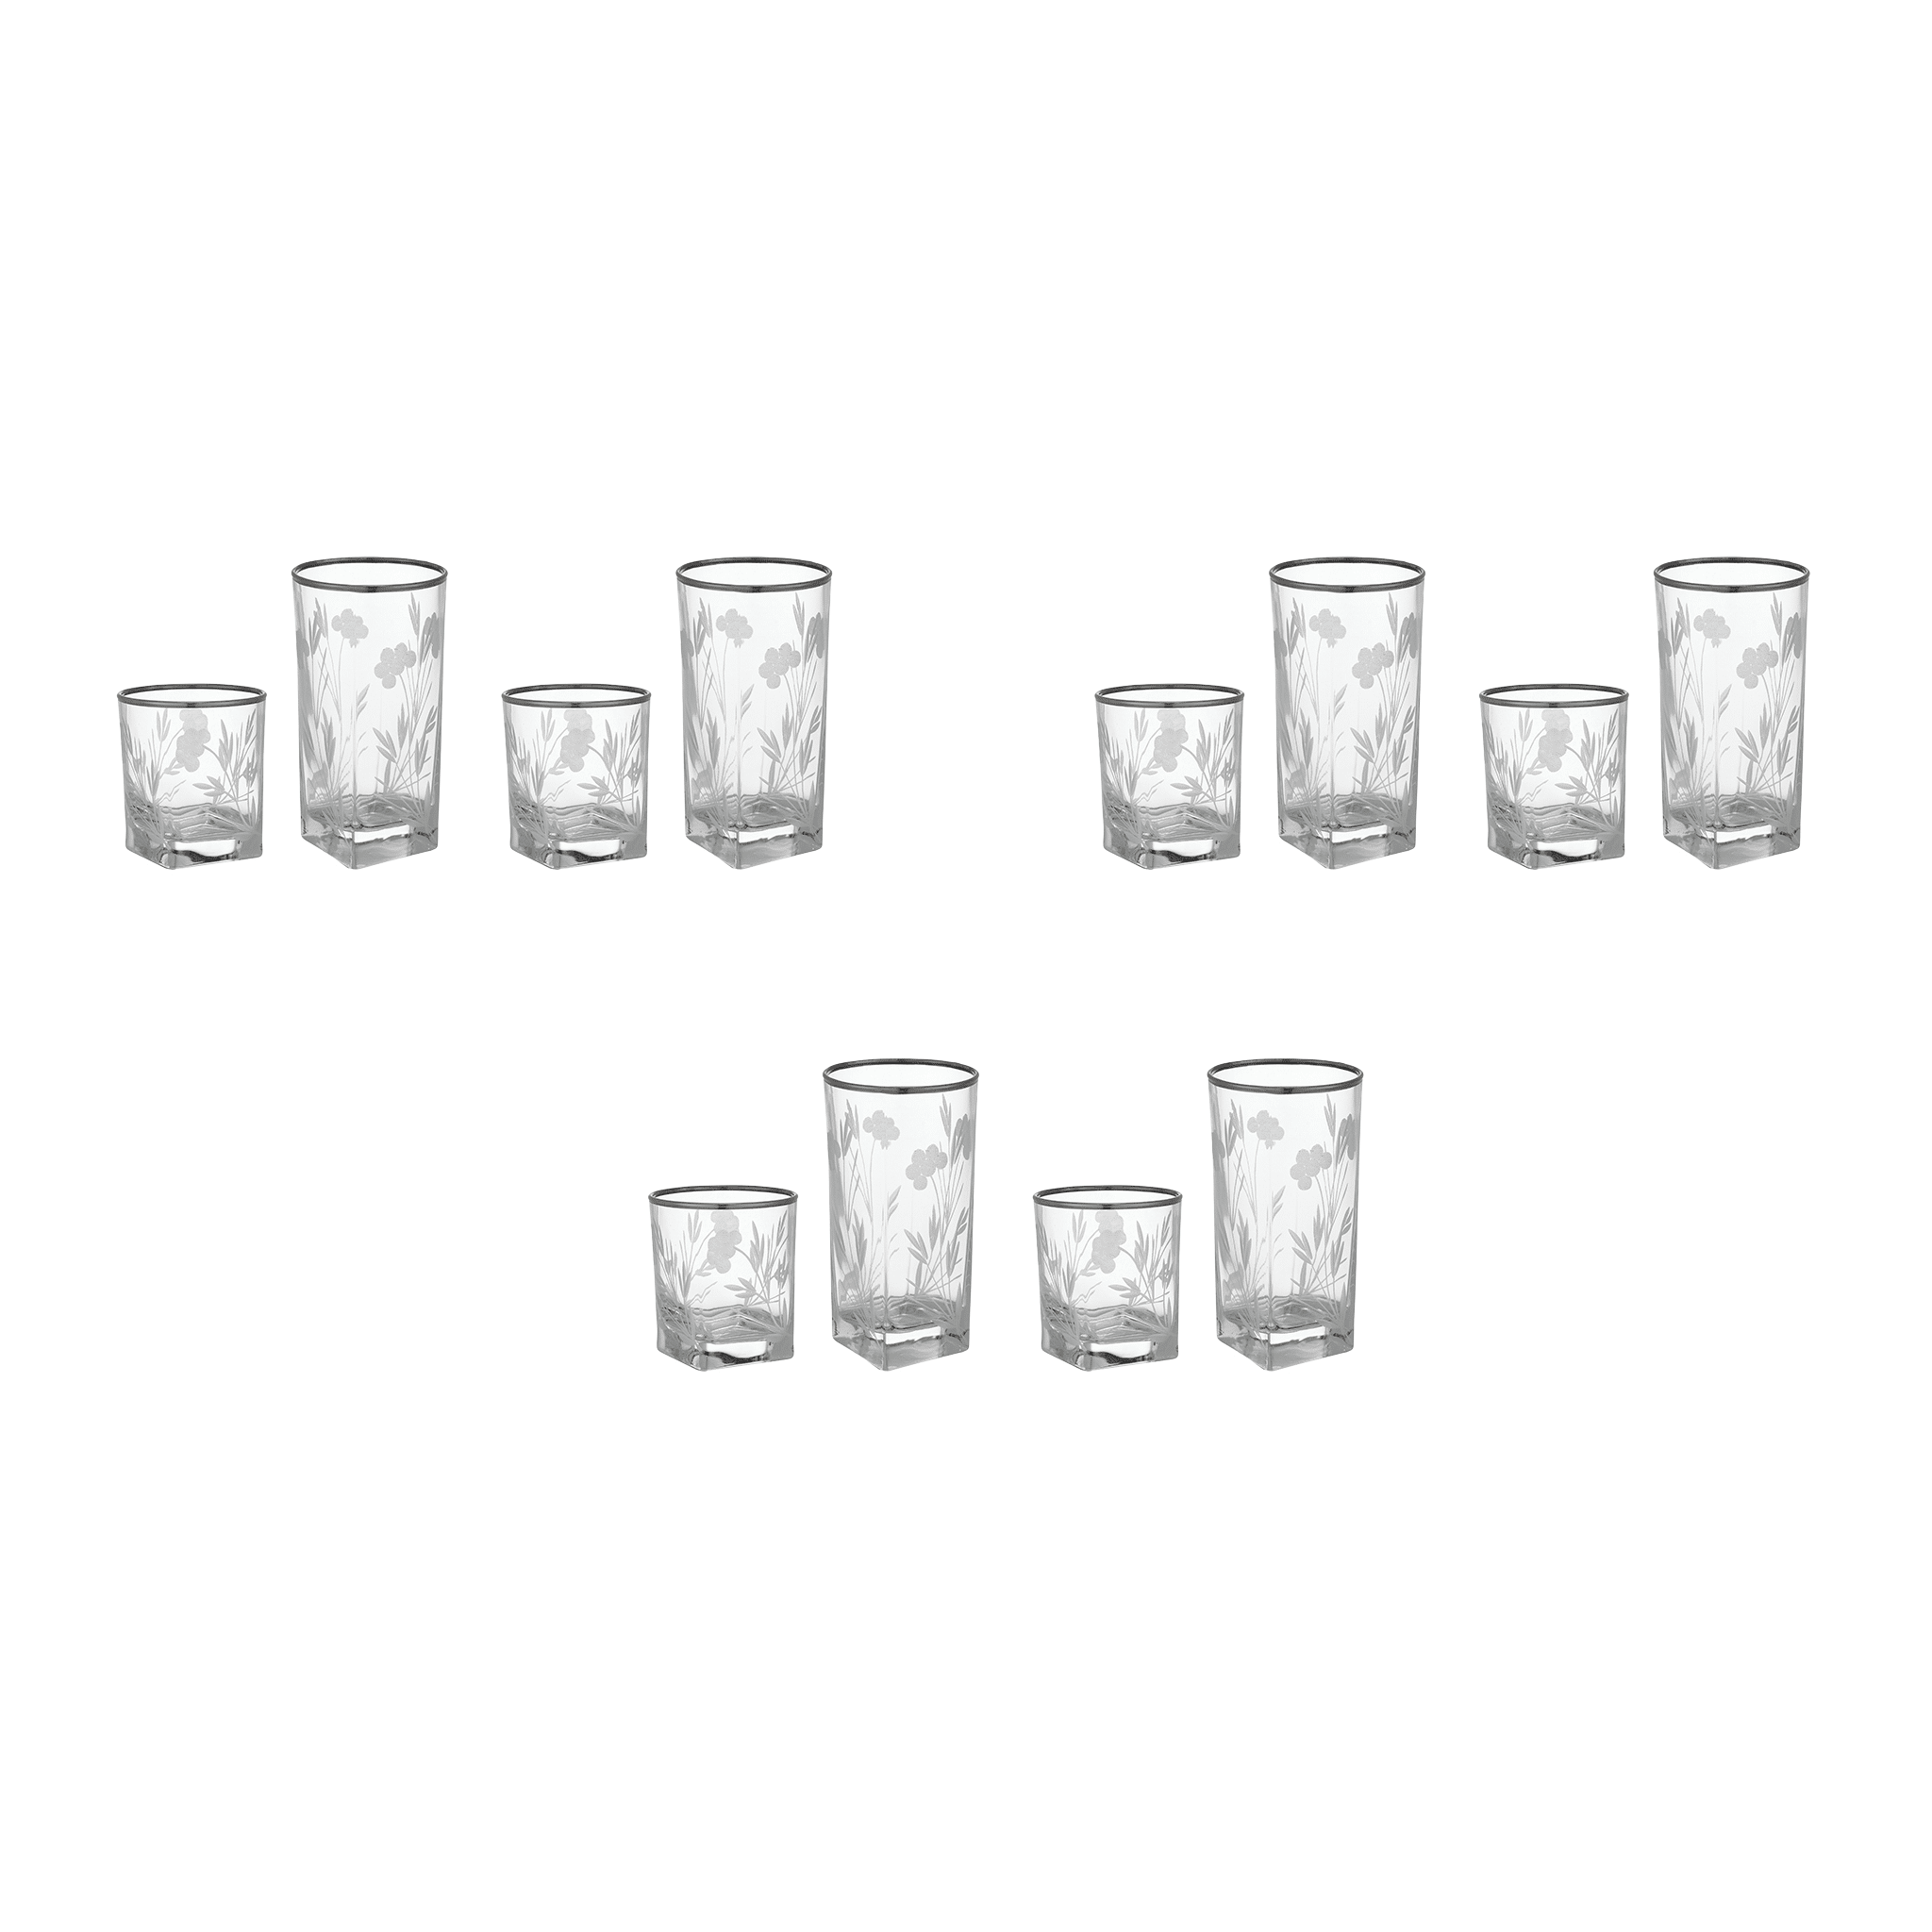 Pasabahce - Decorated Highball & Tumbler Glass Set 12 Pieces - Silver - 305&205ml - Glass - 390005019